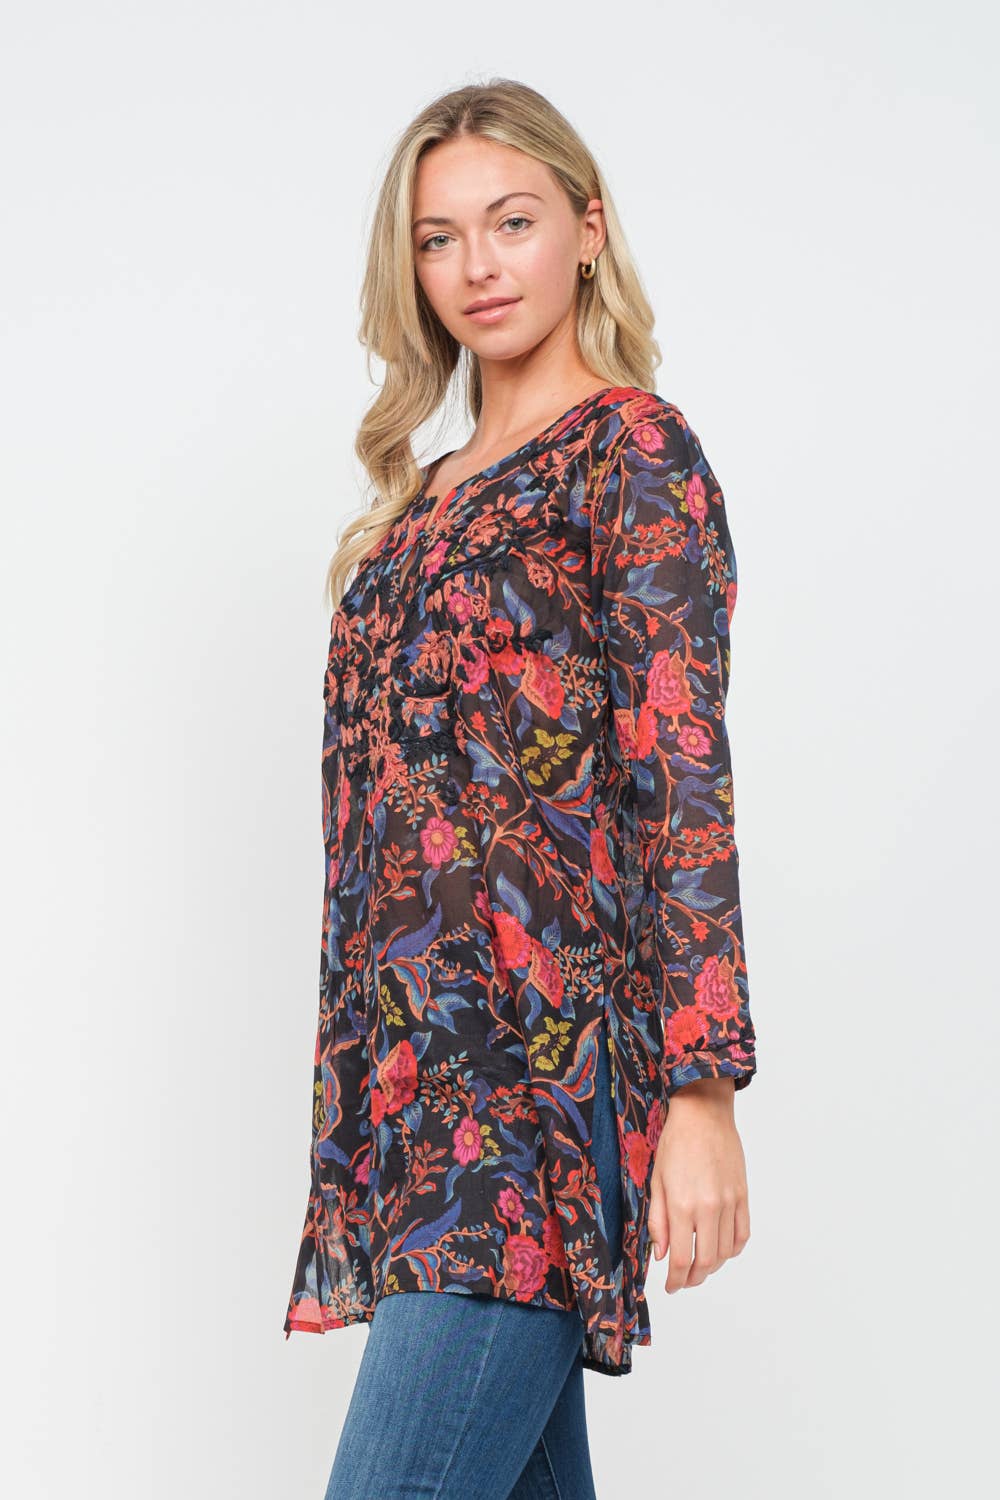 Tunic: Evie Printed Embroidered